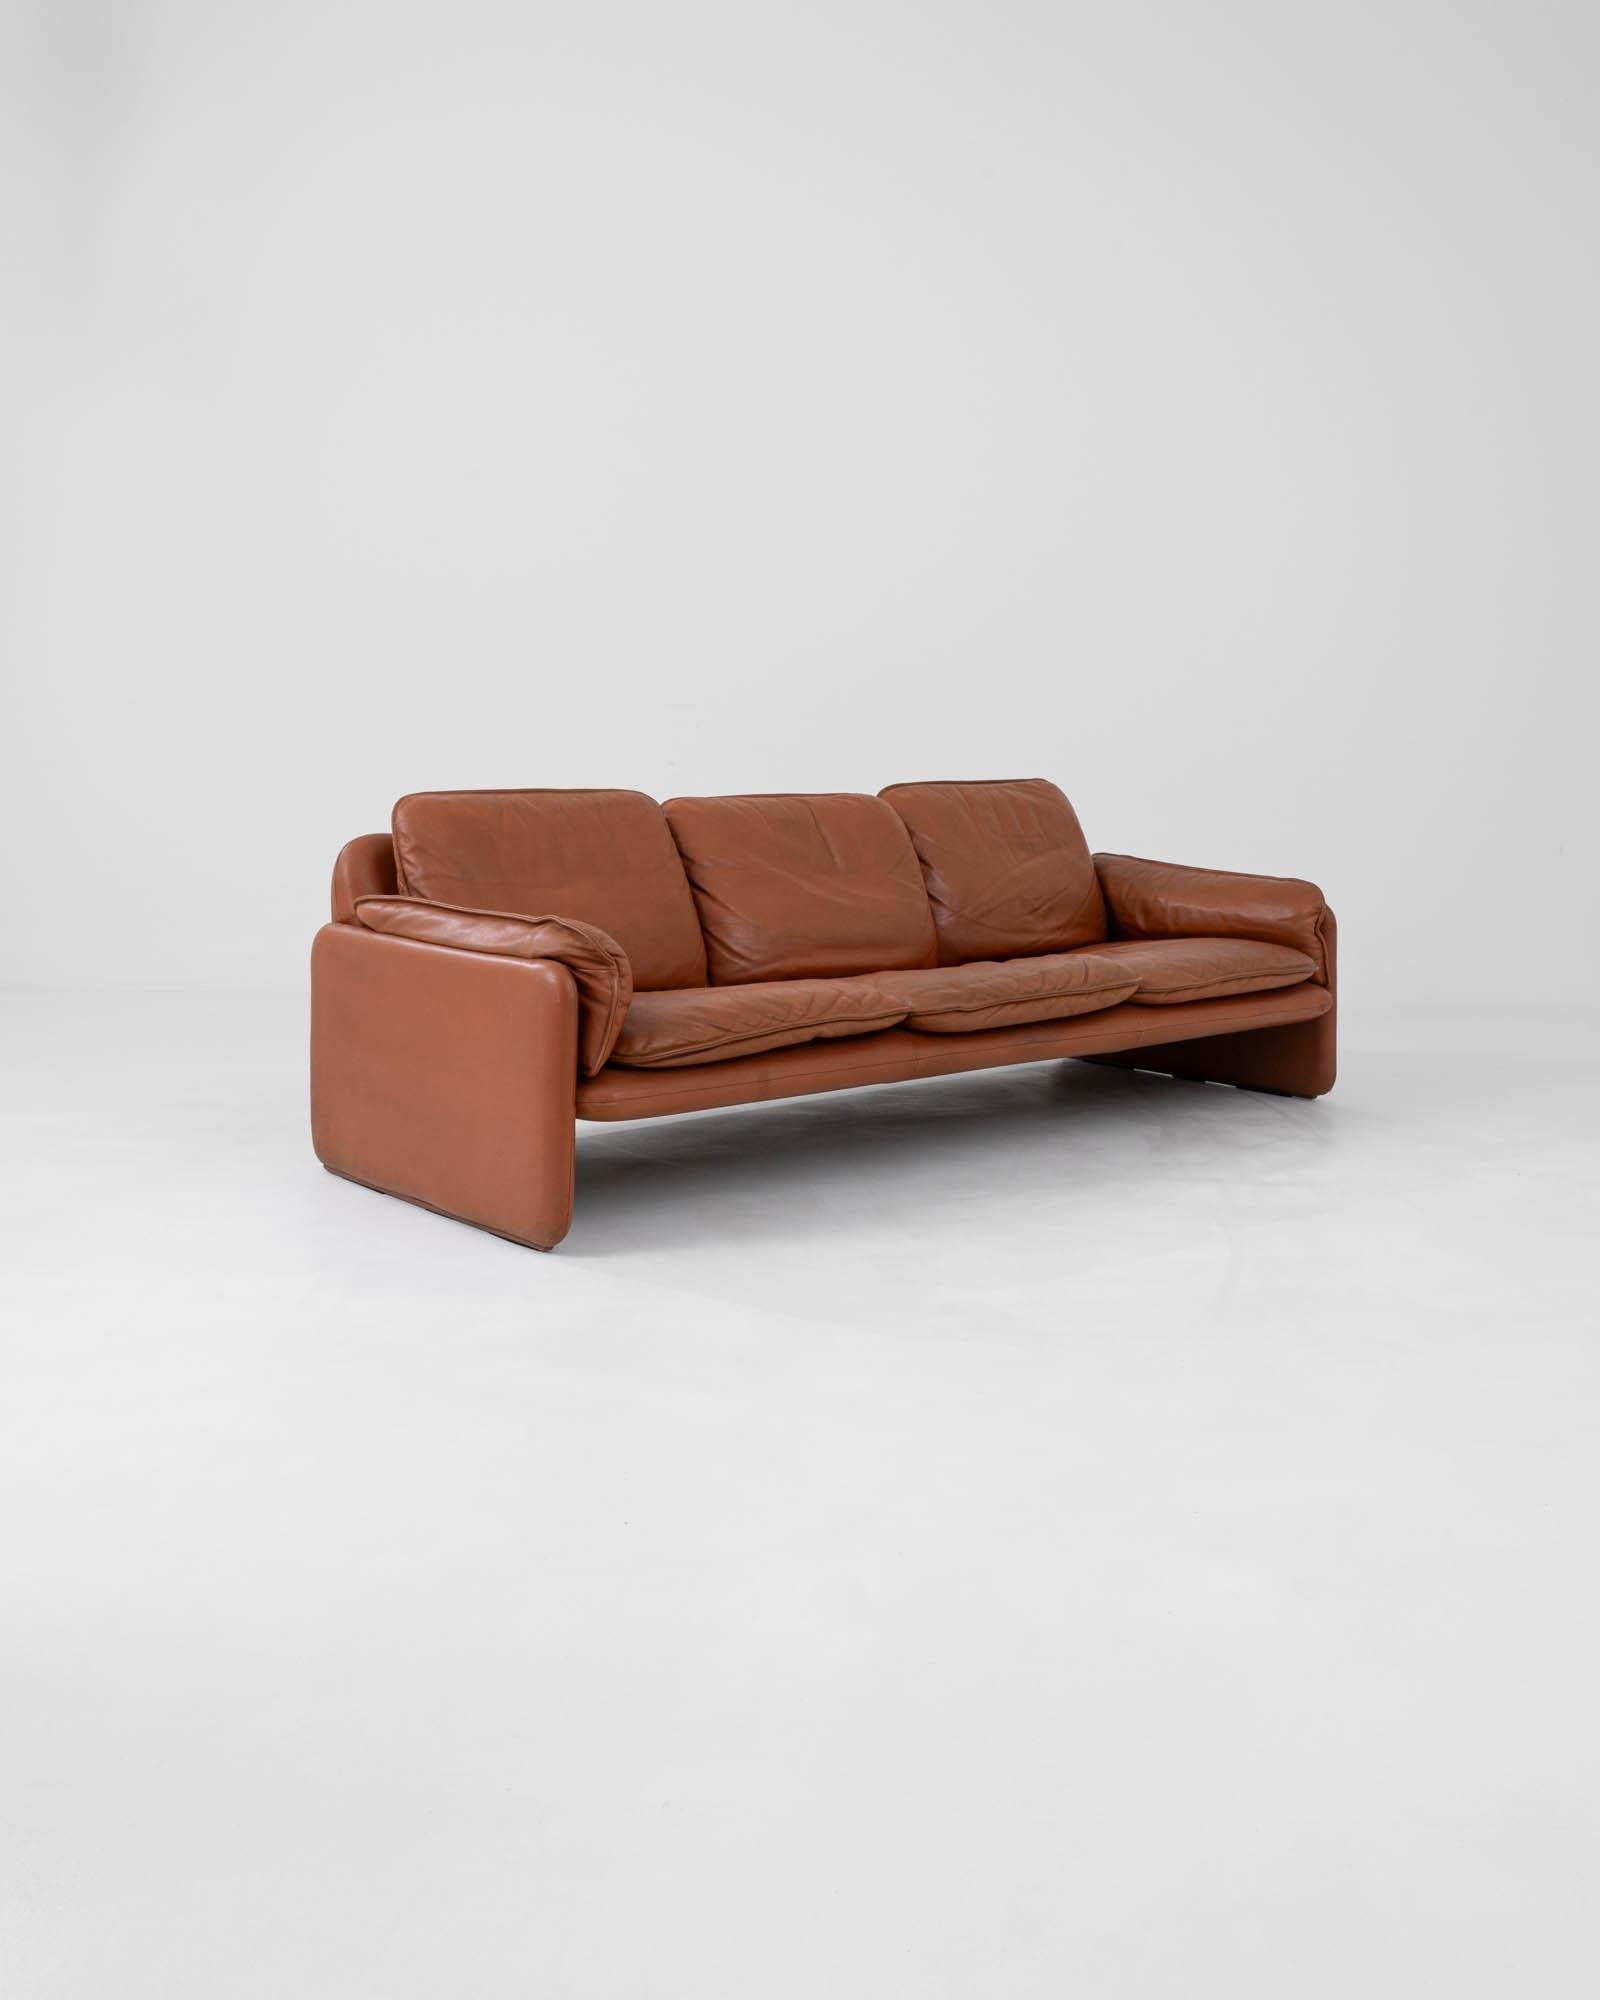 Embrace the unparalleled luxury and timeless design of the 1970s Swiss leather sofa DS61 by De Sede, renowned for its dedication to quality and comfort. Crafted from rich, caramel-colored leather, this sofa features a plush, deep seating area that